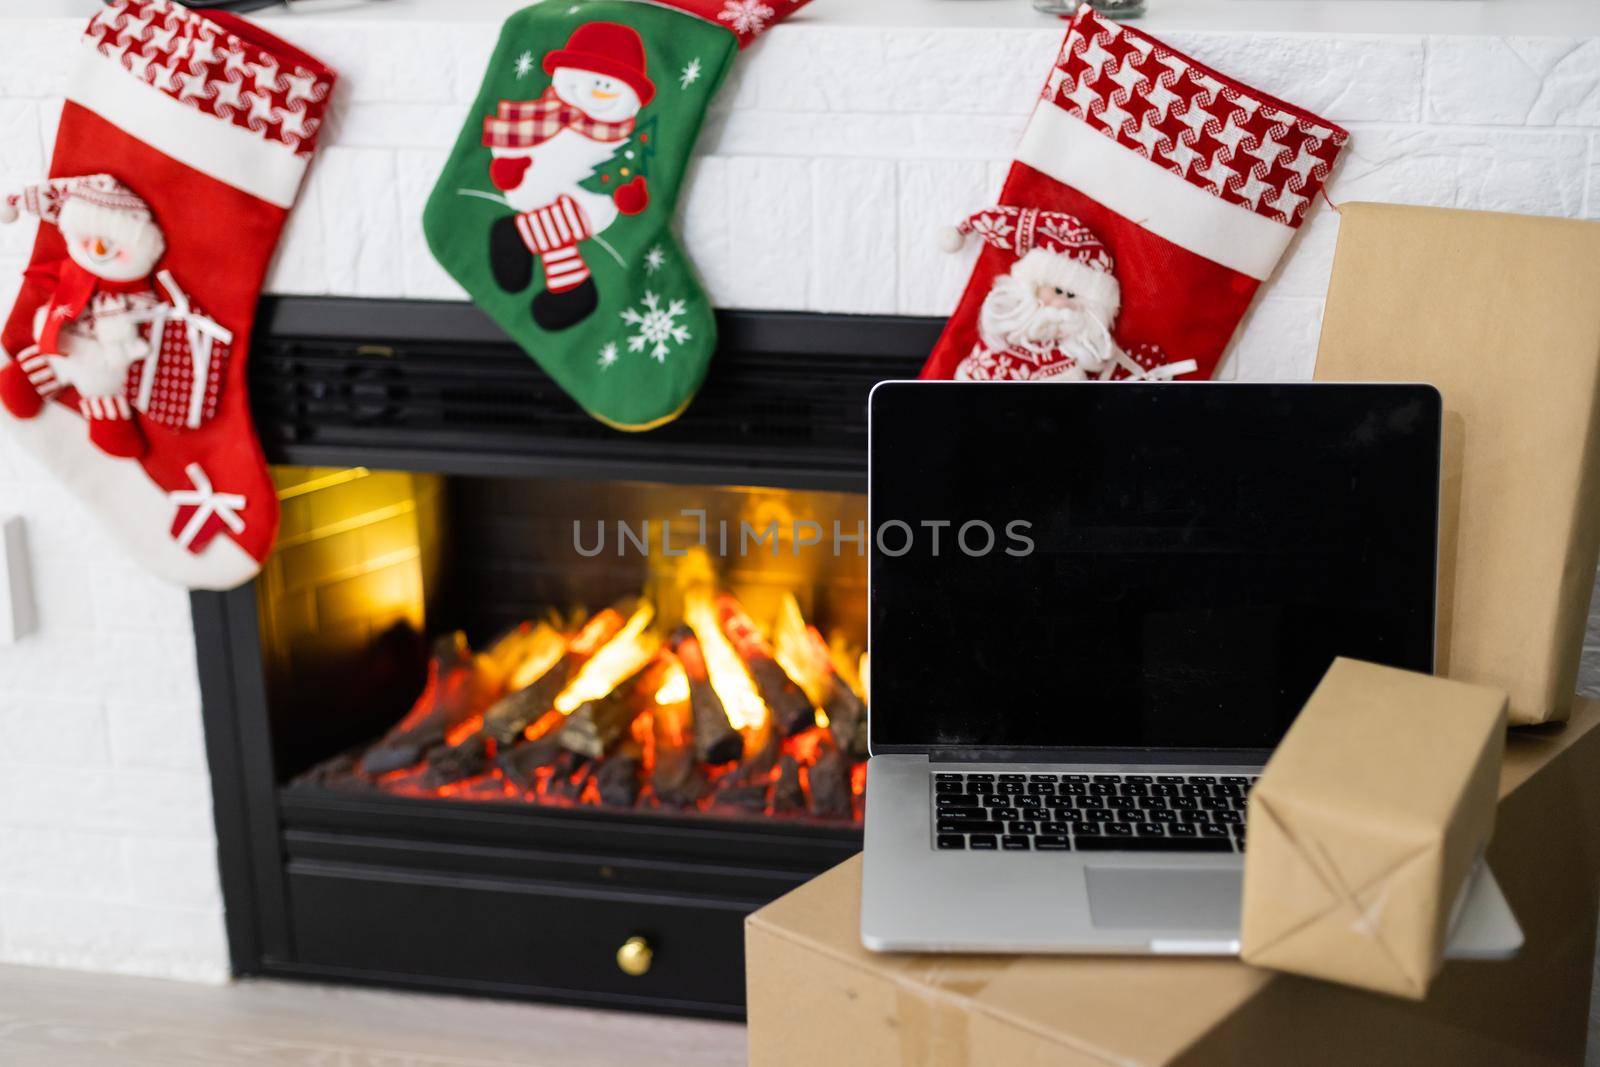 delivery christmas gifts. delivery boxes near fireplace before christmas by Andelov13